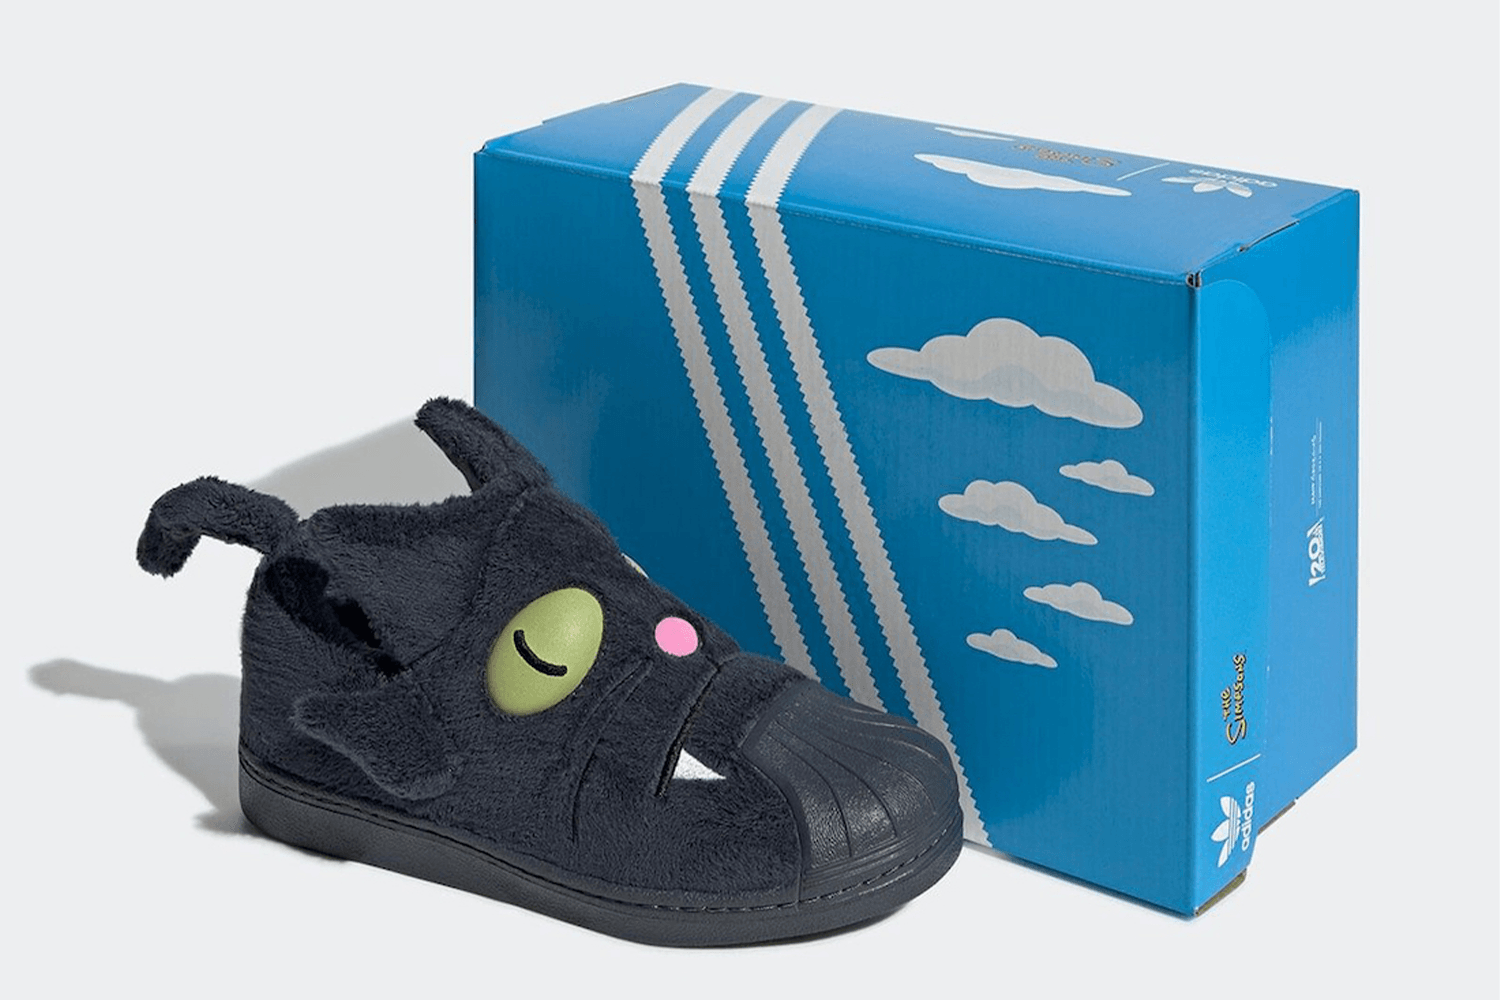 The Simpsons x adidas droppen Superstar 'Snowball'